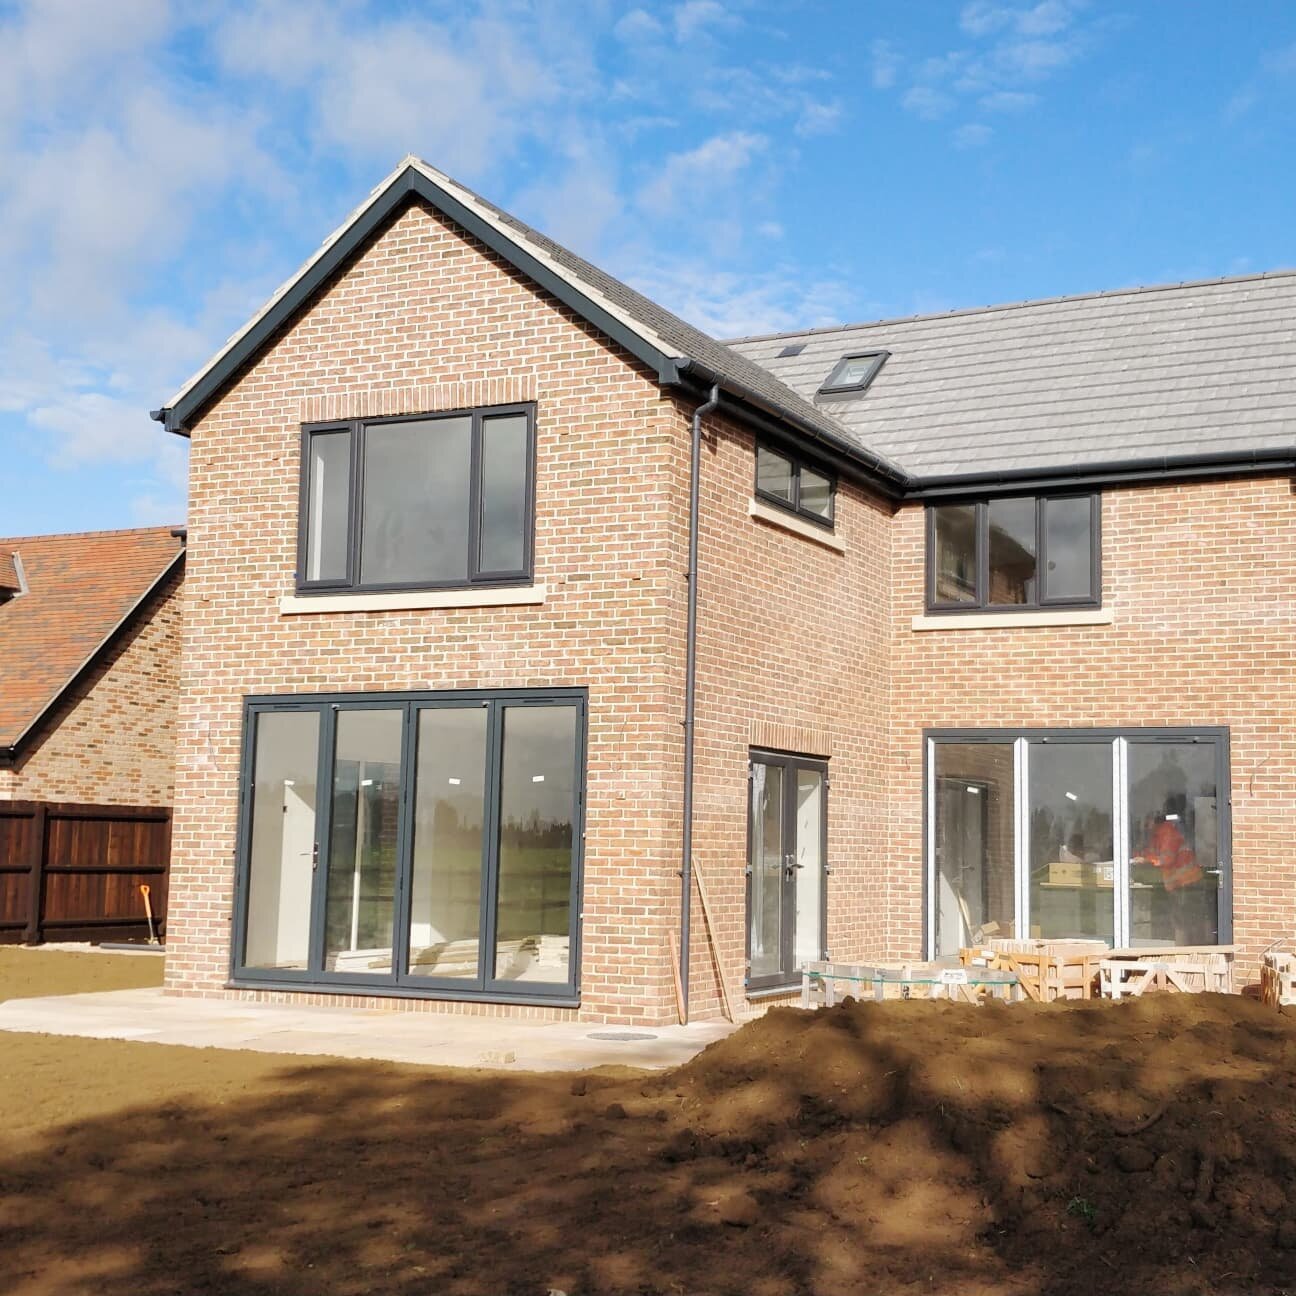 Stunning views out to the south facing garden from our Greenfields development fast approaching completion. You could have your morning coffee in the kitchen or enjoy it in the triple aspect windowed living room, with bifold doors wide open. We look 